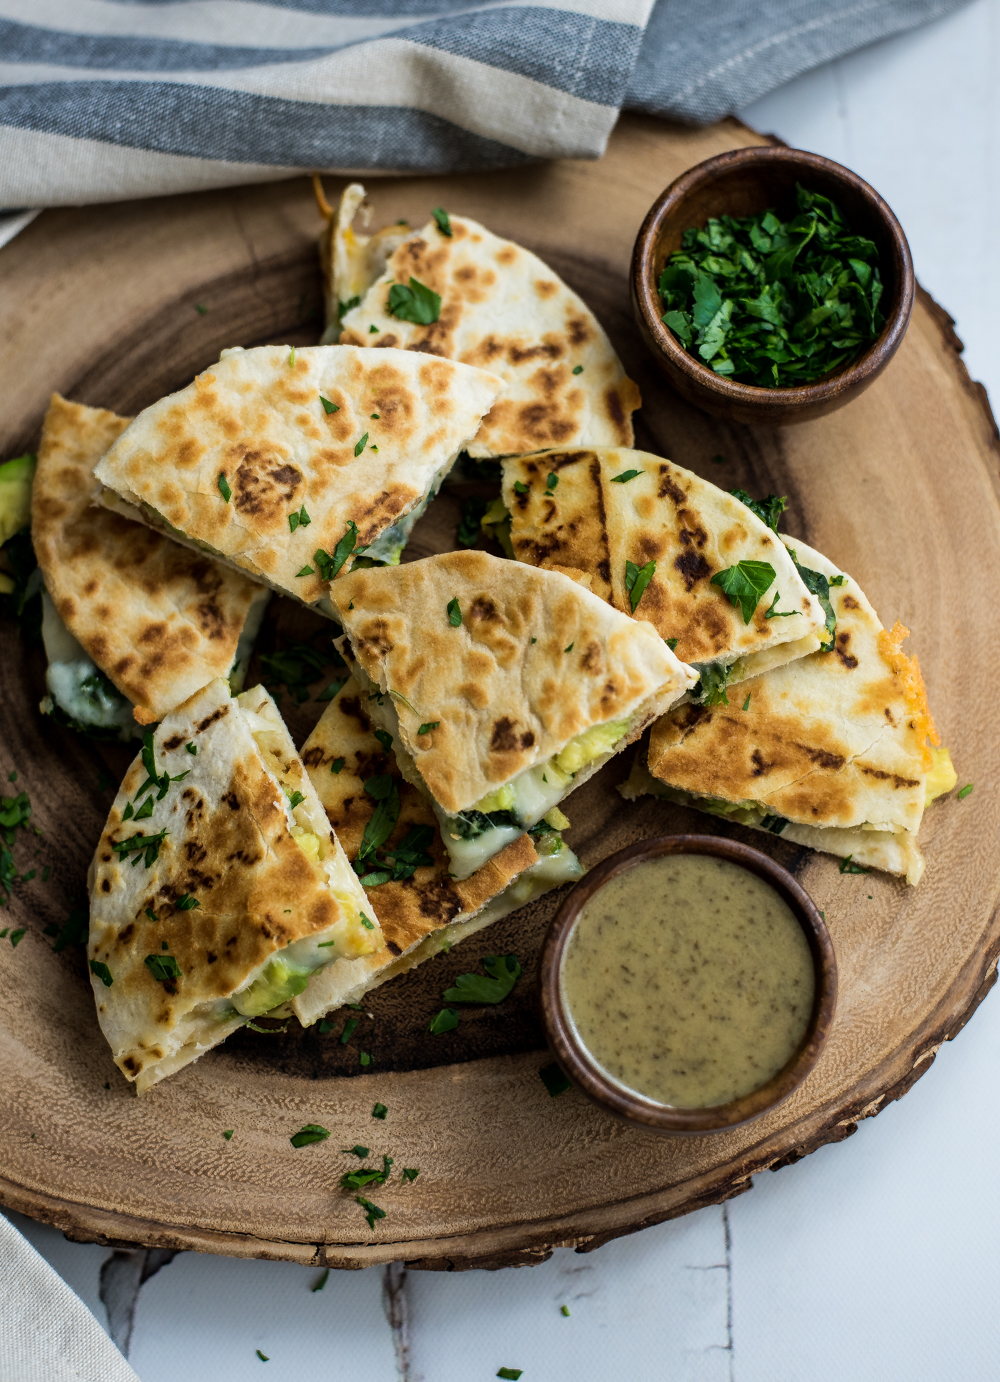 Mini Spinach and Shrimp Quesadillas with Avocado are the perfect after school, after work, or late night snack! They are super simple, quick, and delicious!